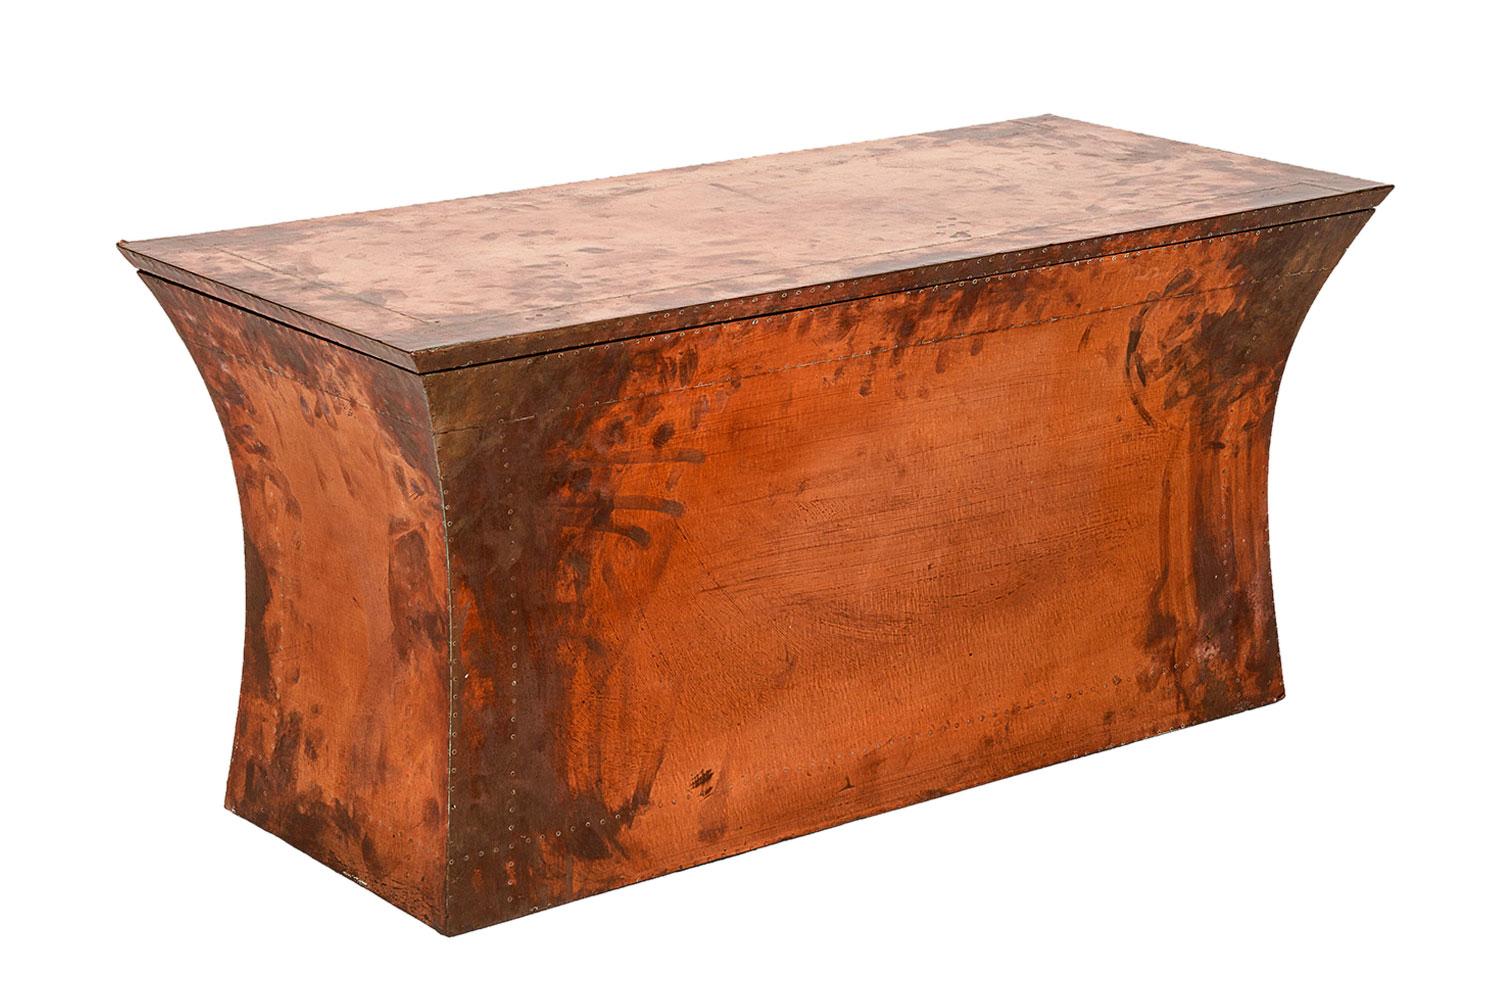 Handmade copper Vaisseau Bench By Stephanie Odegard.

This bench is handmade and has a solid teakwood frame that is clad in bronze and is part of the Stephanie Odegard Collection. Made for use, this functional piece is great for storage with